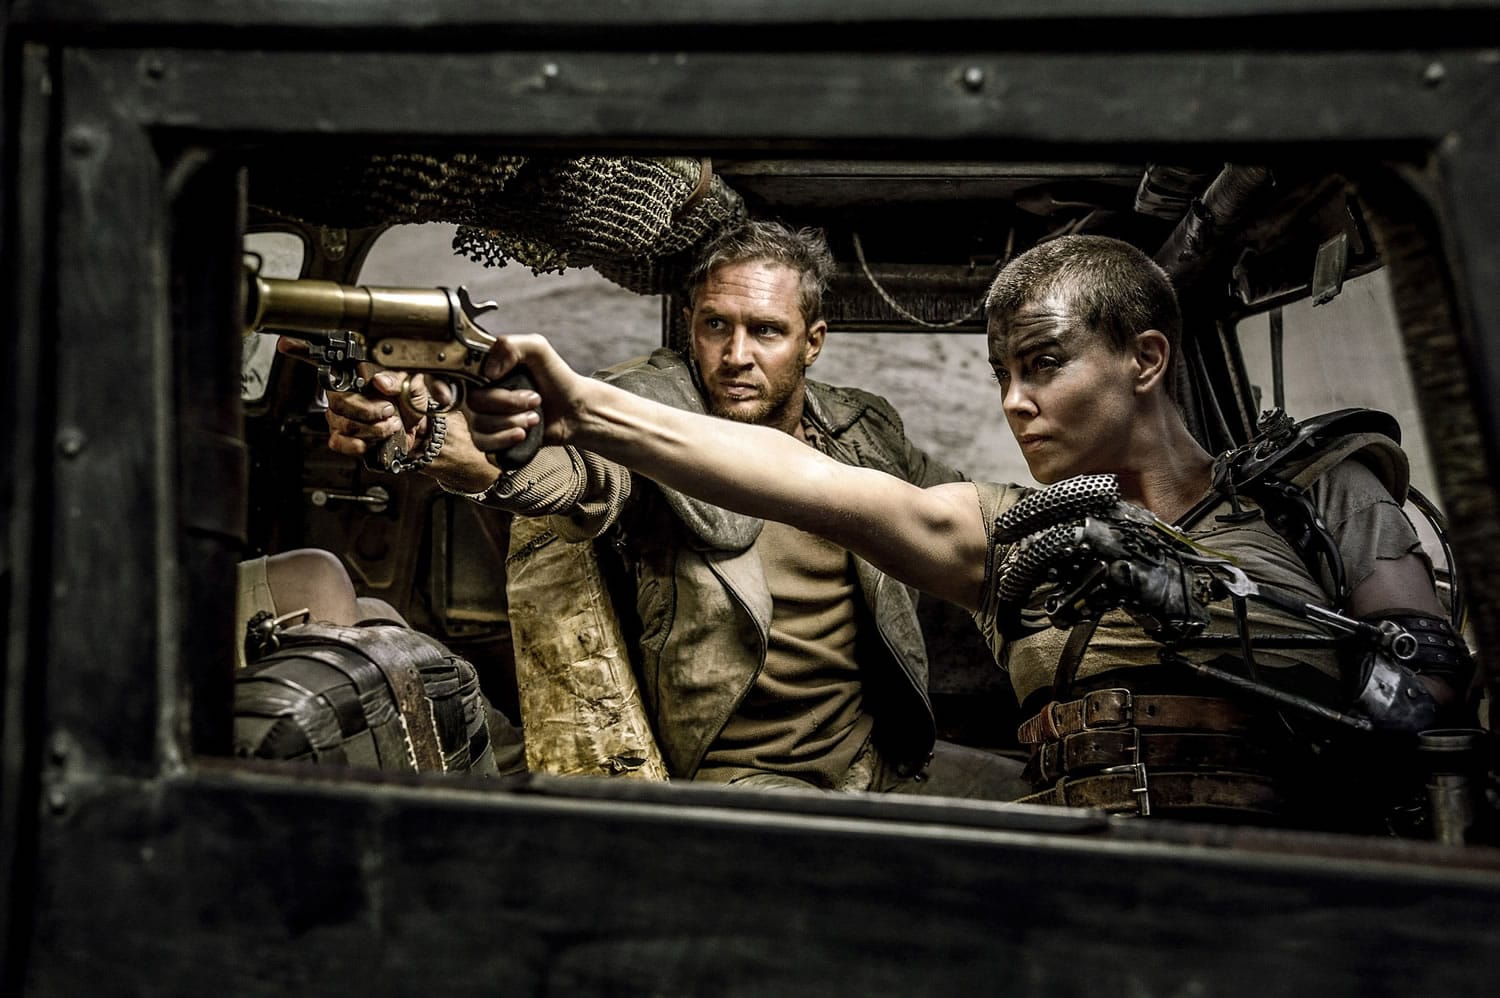 Tom Hardy, left, as Max Rockatansky and Charlize Theron as Imperator Furiosa take aim in &quot;Mad Max: Fury Road.&quot;